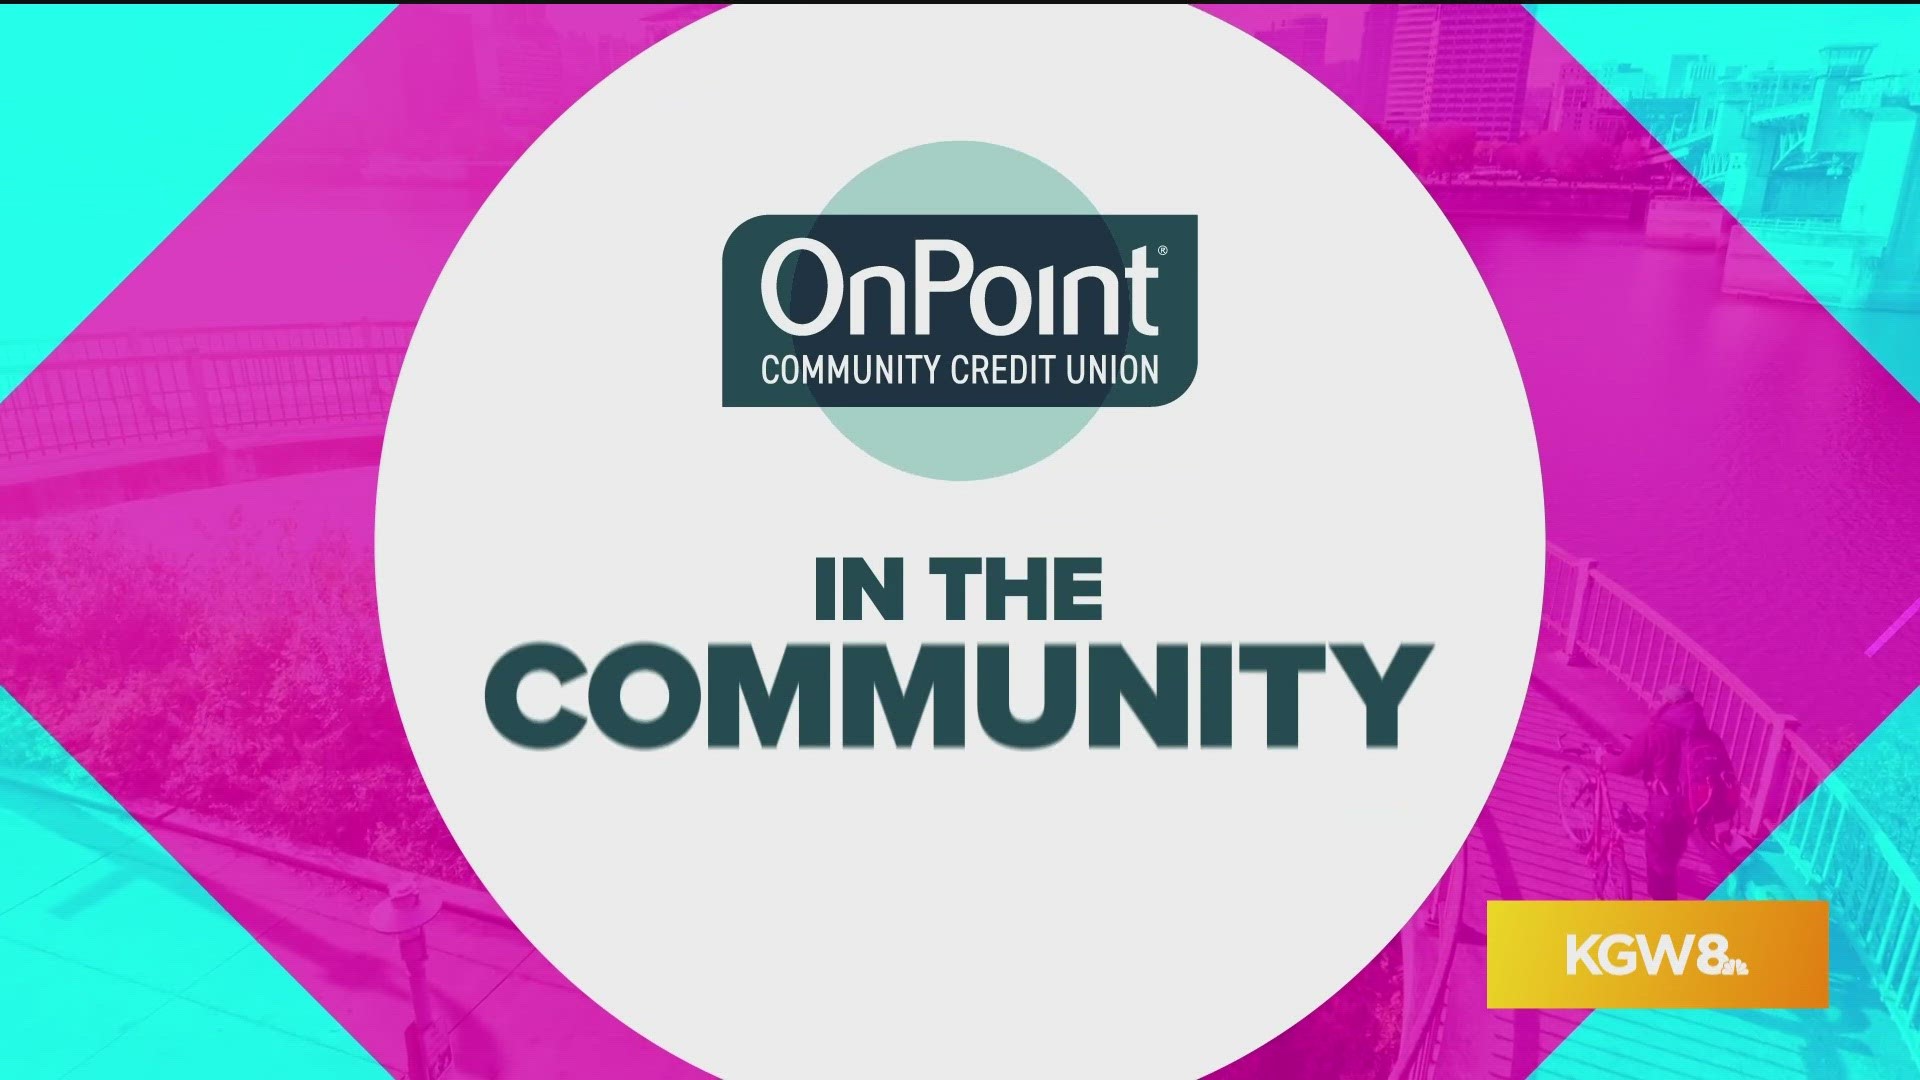 This segment is sponsored by OnPoint Community Credit Union